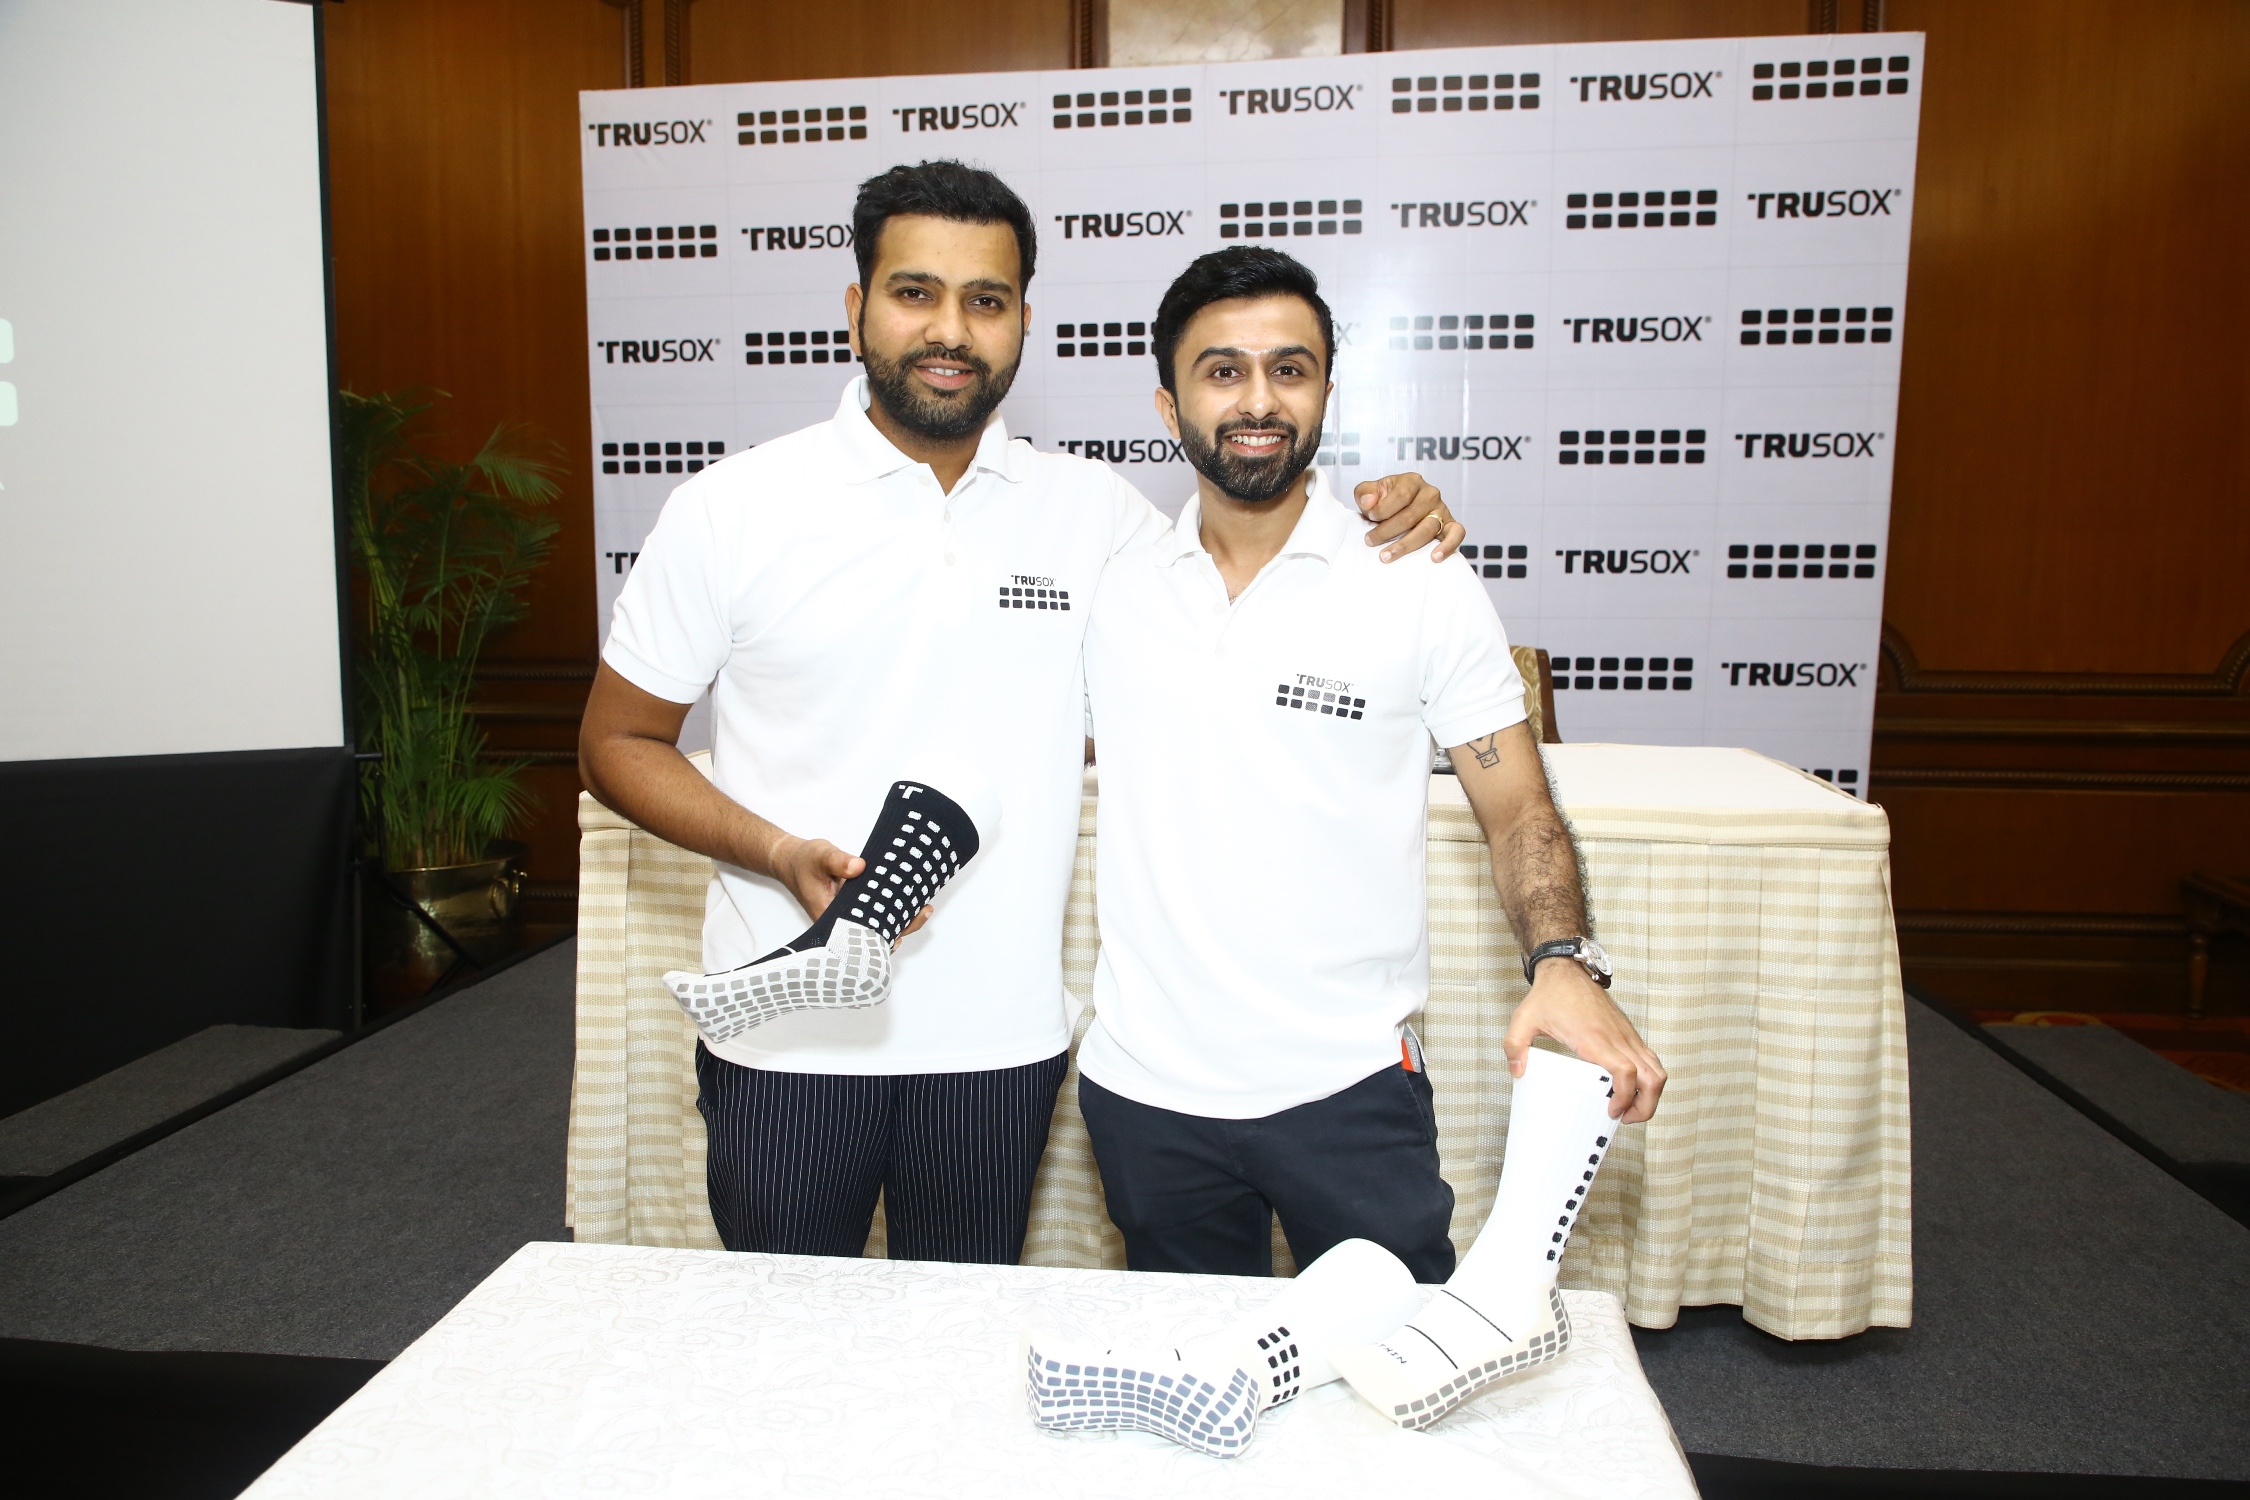 Trusox arrives in India with Brand Ambassador Rohit Sharma